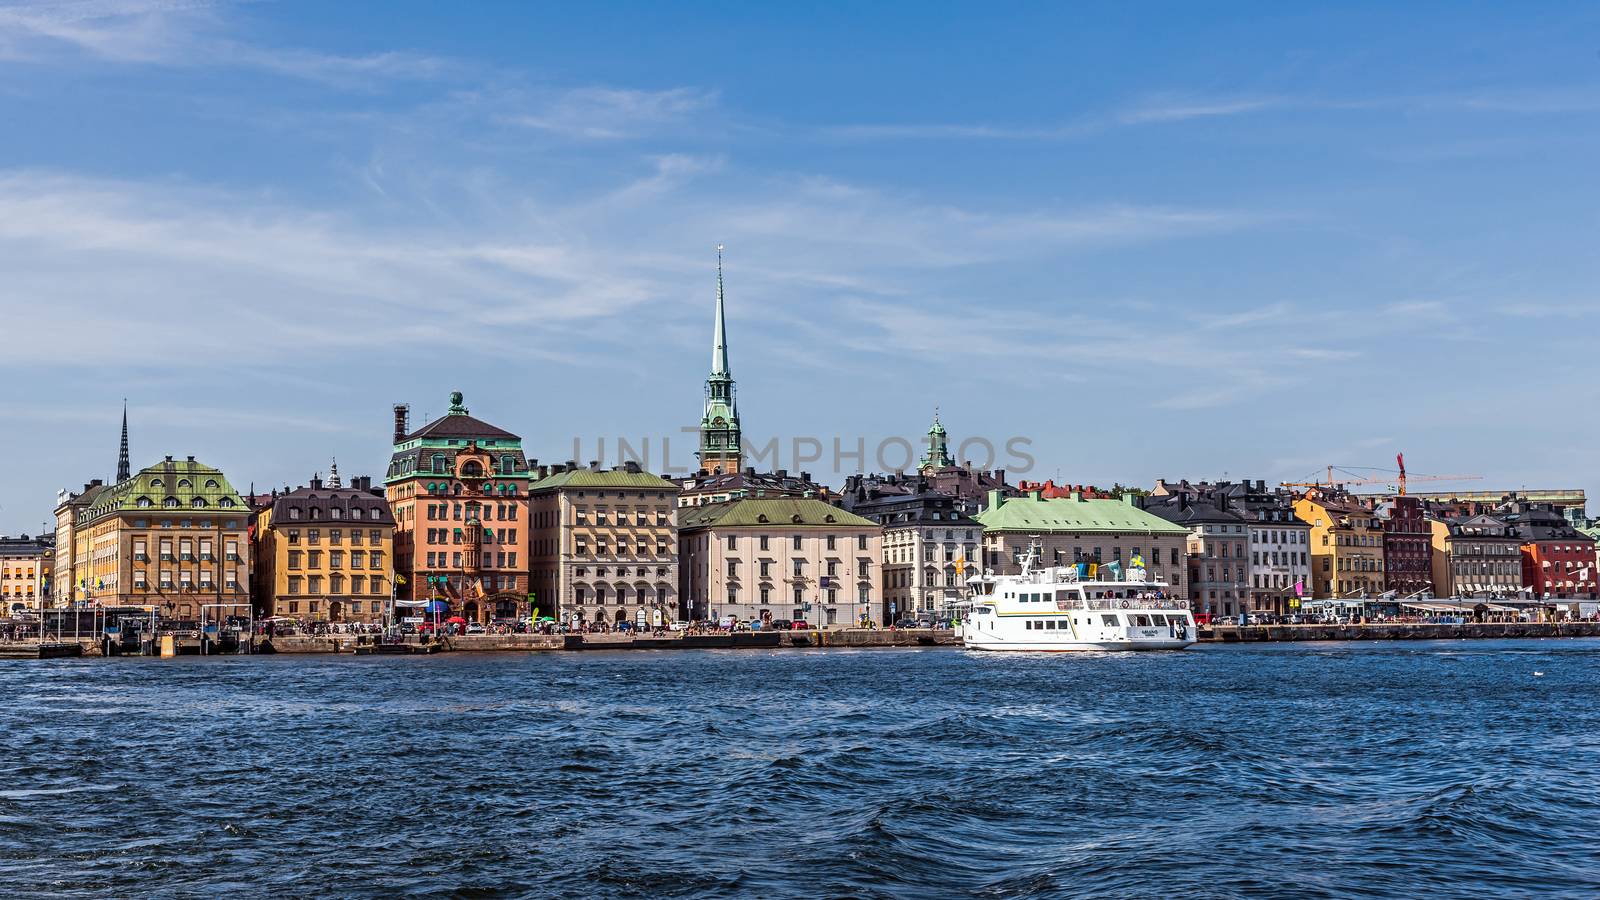 View on Gamla stan (The Old Town) in Stockholm. The town dates back to the 13th century and is the main attraction of the city with a rich collection of medieval architecture.